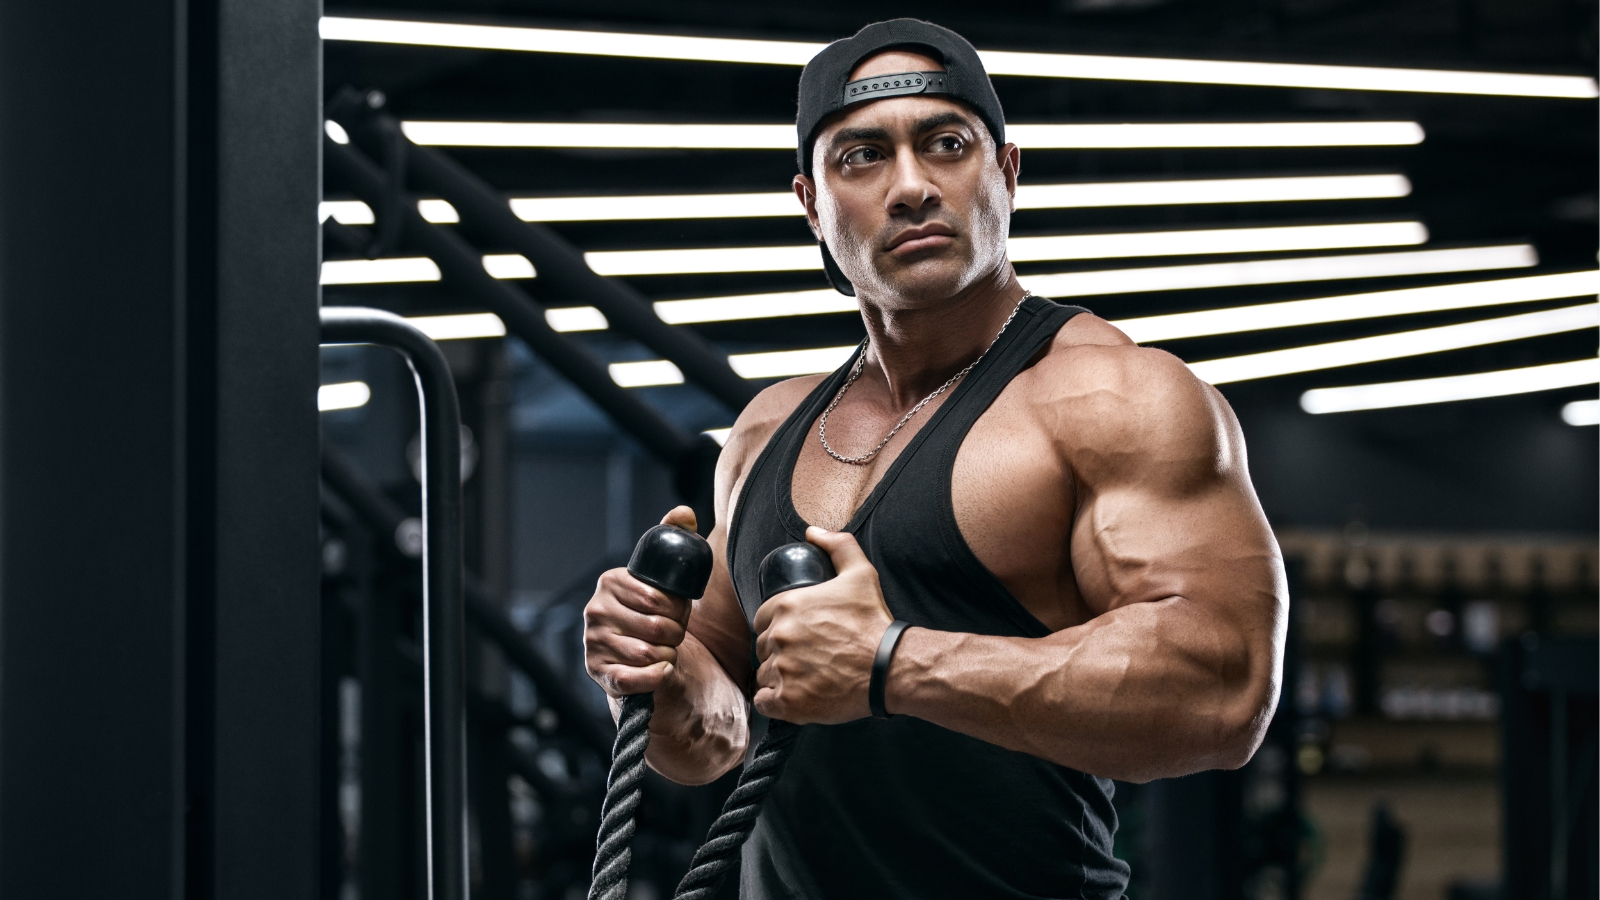 Try These 6 Unique Bodybuilding Arm Exercises to Spark New Muscle Growth